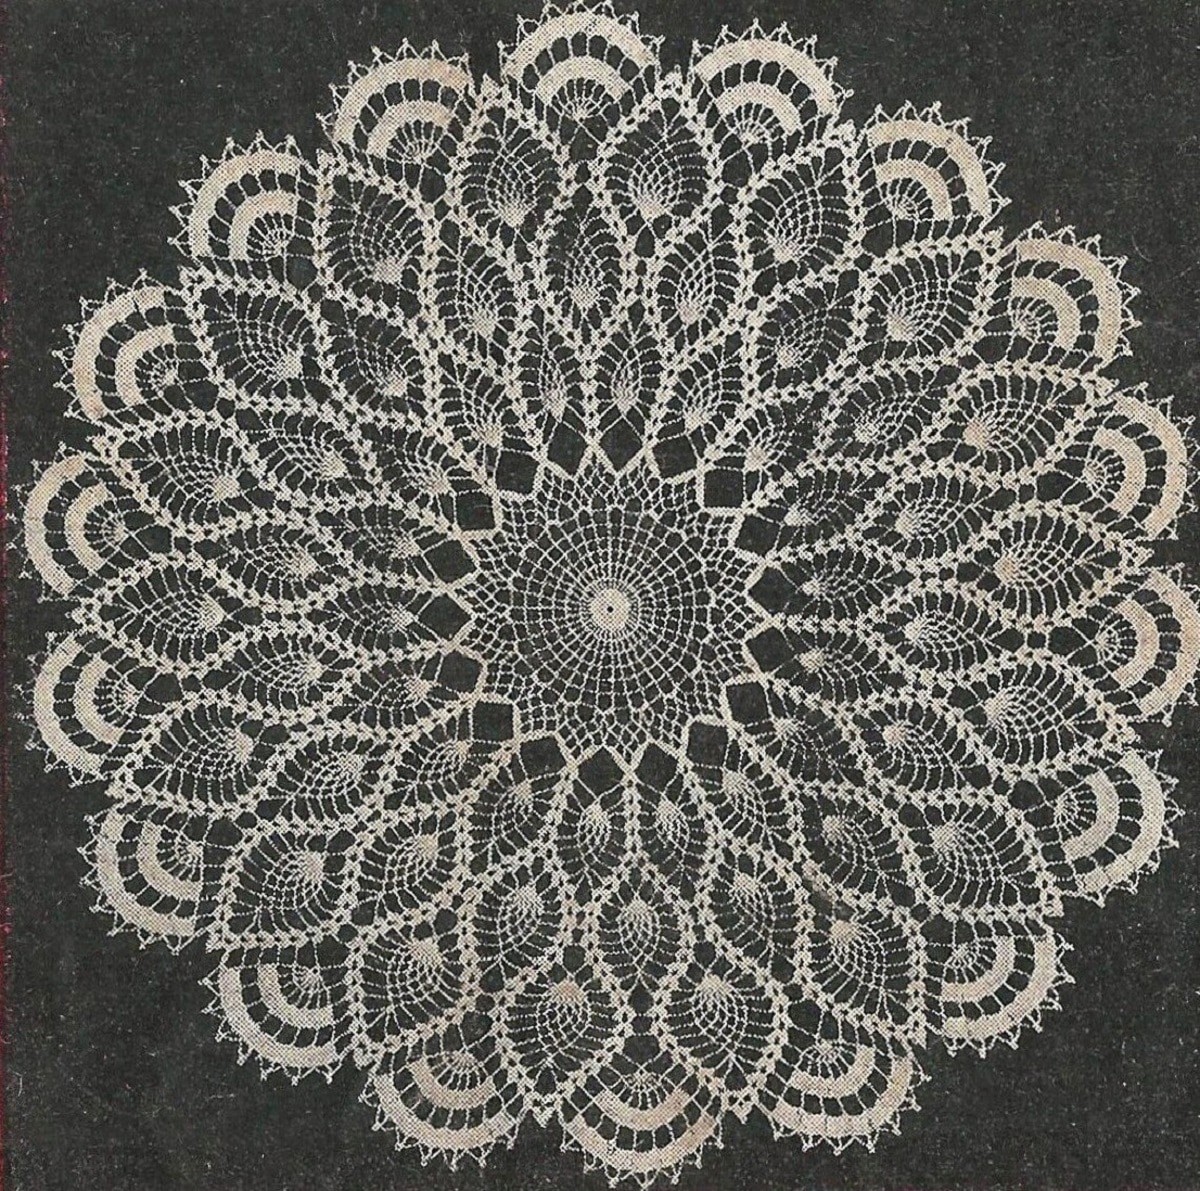 Large crochet doily with a round center and stitched pineapples spreading out in a petal-like design laid on a black background.